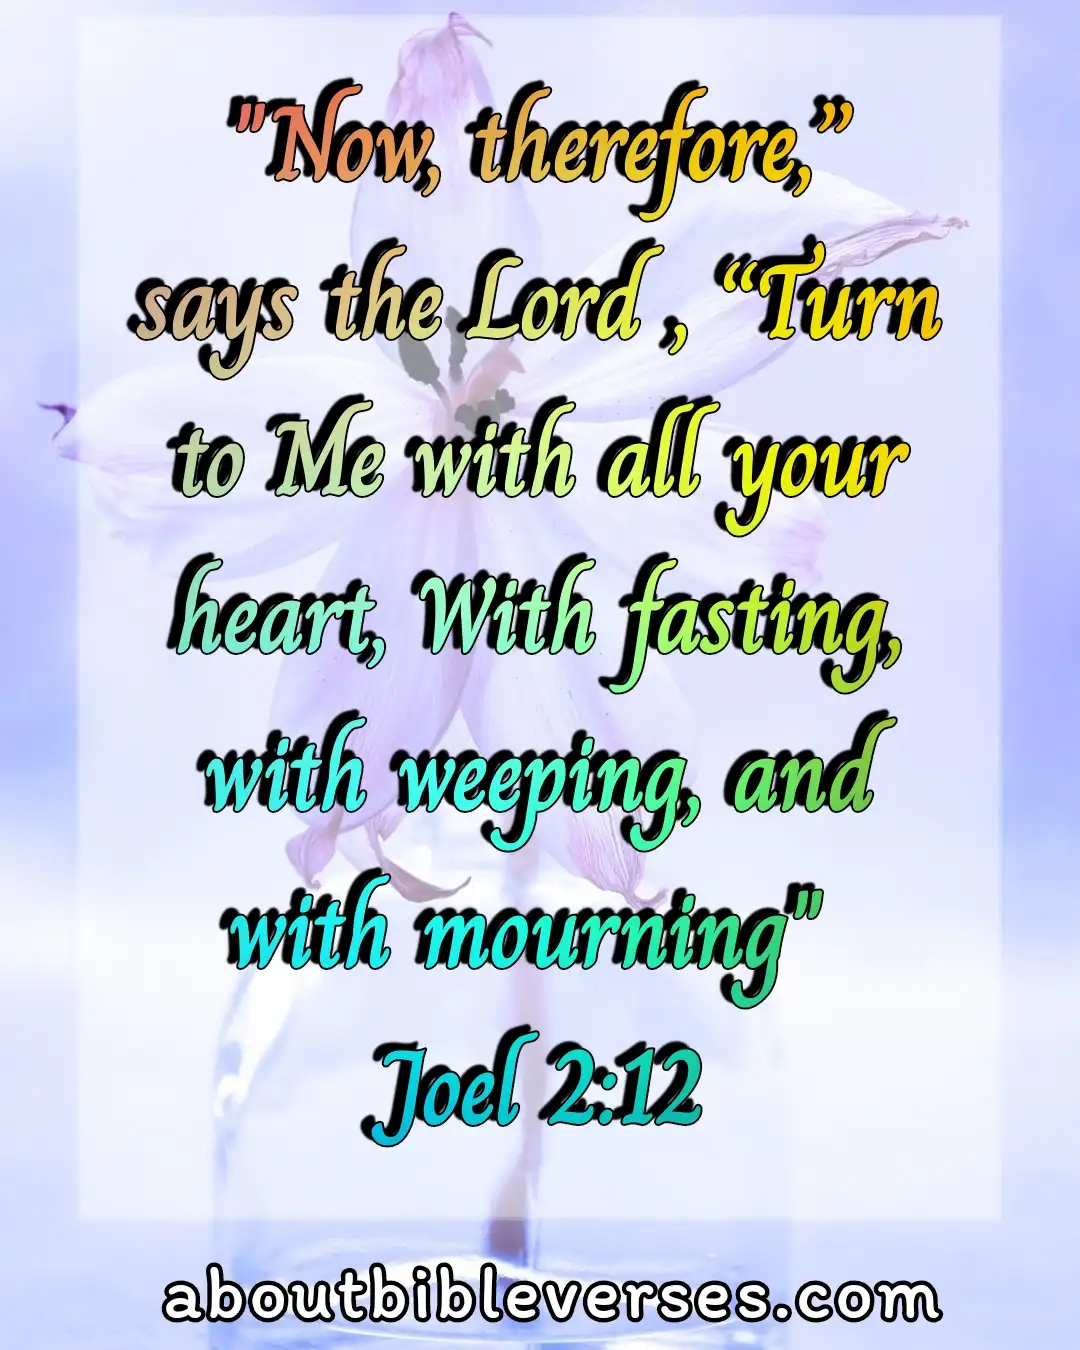 Bible Verses about Fasting (Joel 2:12)